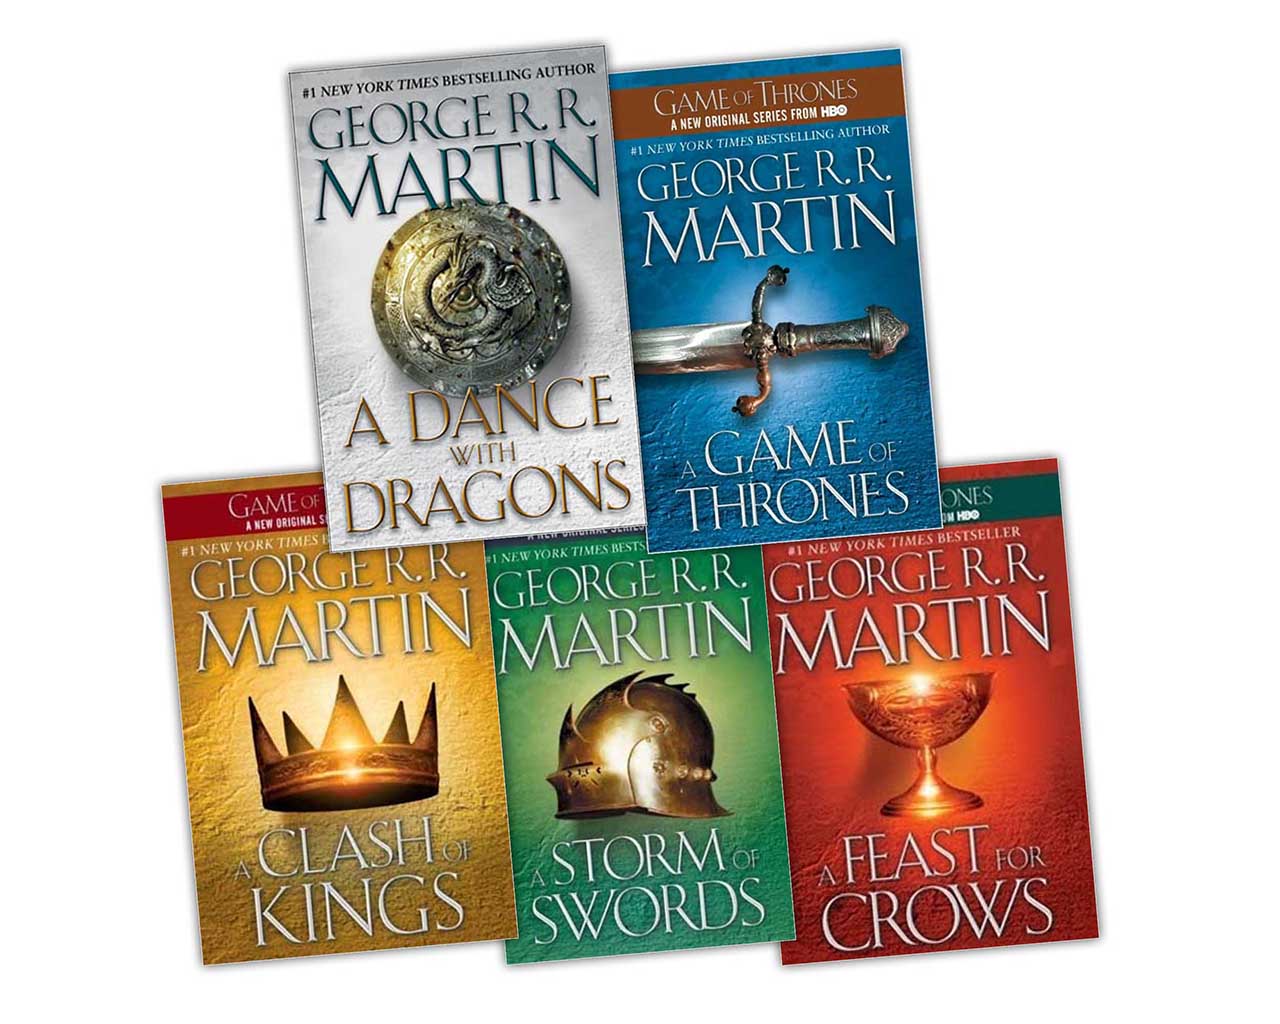 game-of-thrones-booka-game-of-thrones-book-set-gifts-gift-baskets-gift-ideas-maojdyn8.jpg